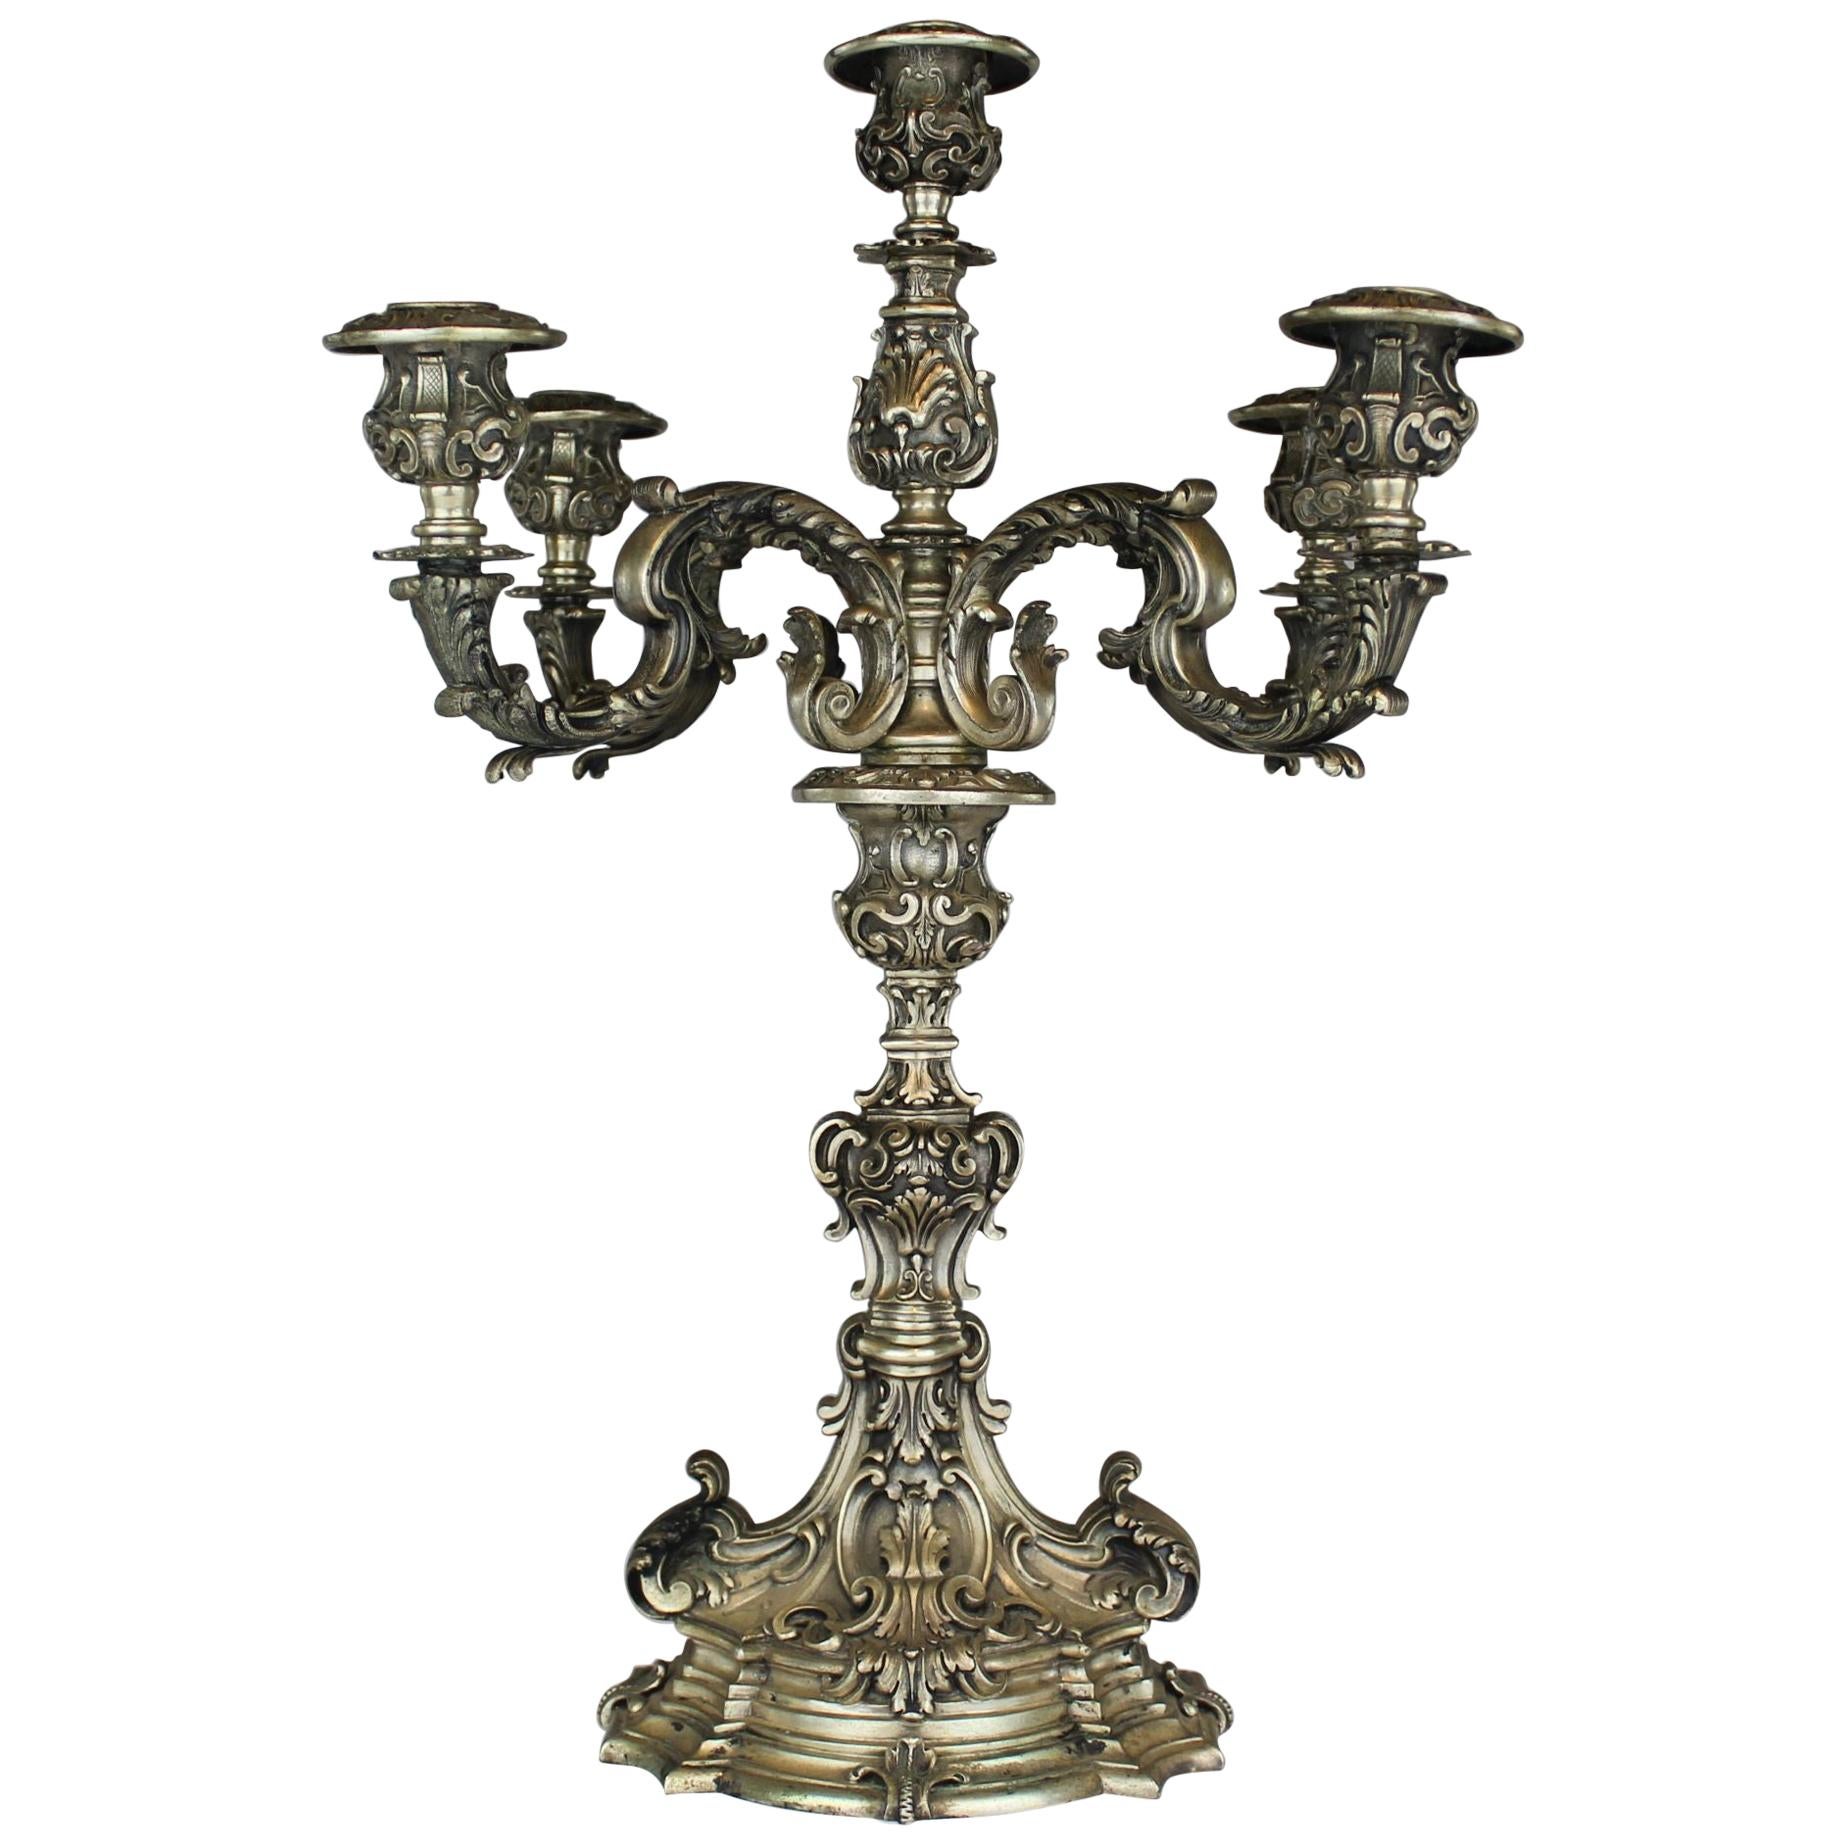 Candelabra 5 Arms, Silver 800/°°, early 20th Century, Italy